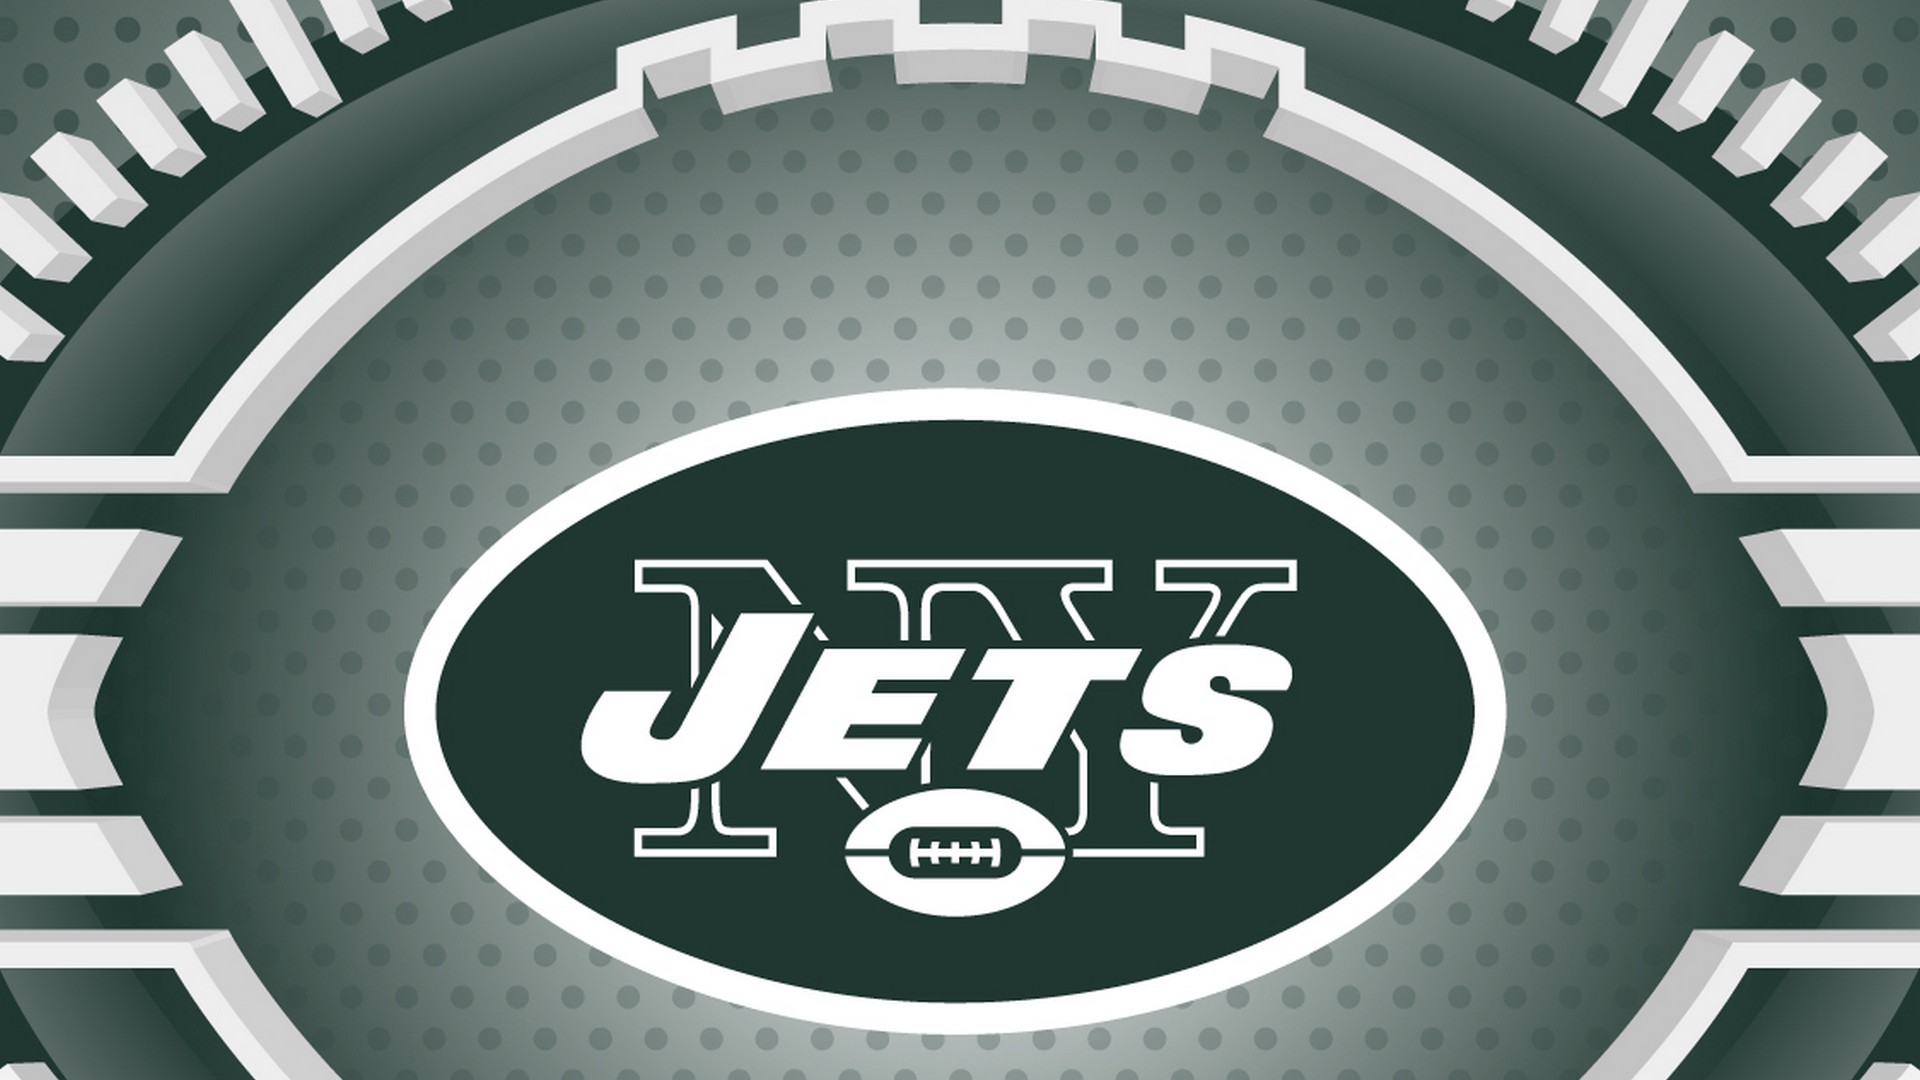 New York Jets For PC Wallpaper With Resolution 1920X1080 pixel. You can make this wallpaper for your Mac or Windows Desktop Background, iPhone, Android or Tablet and another Smartphone device for free